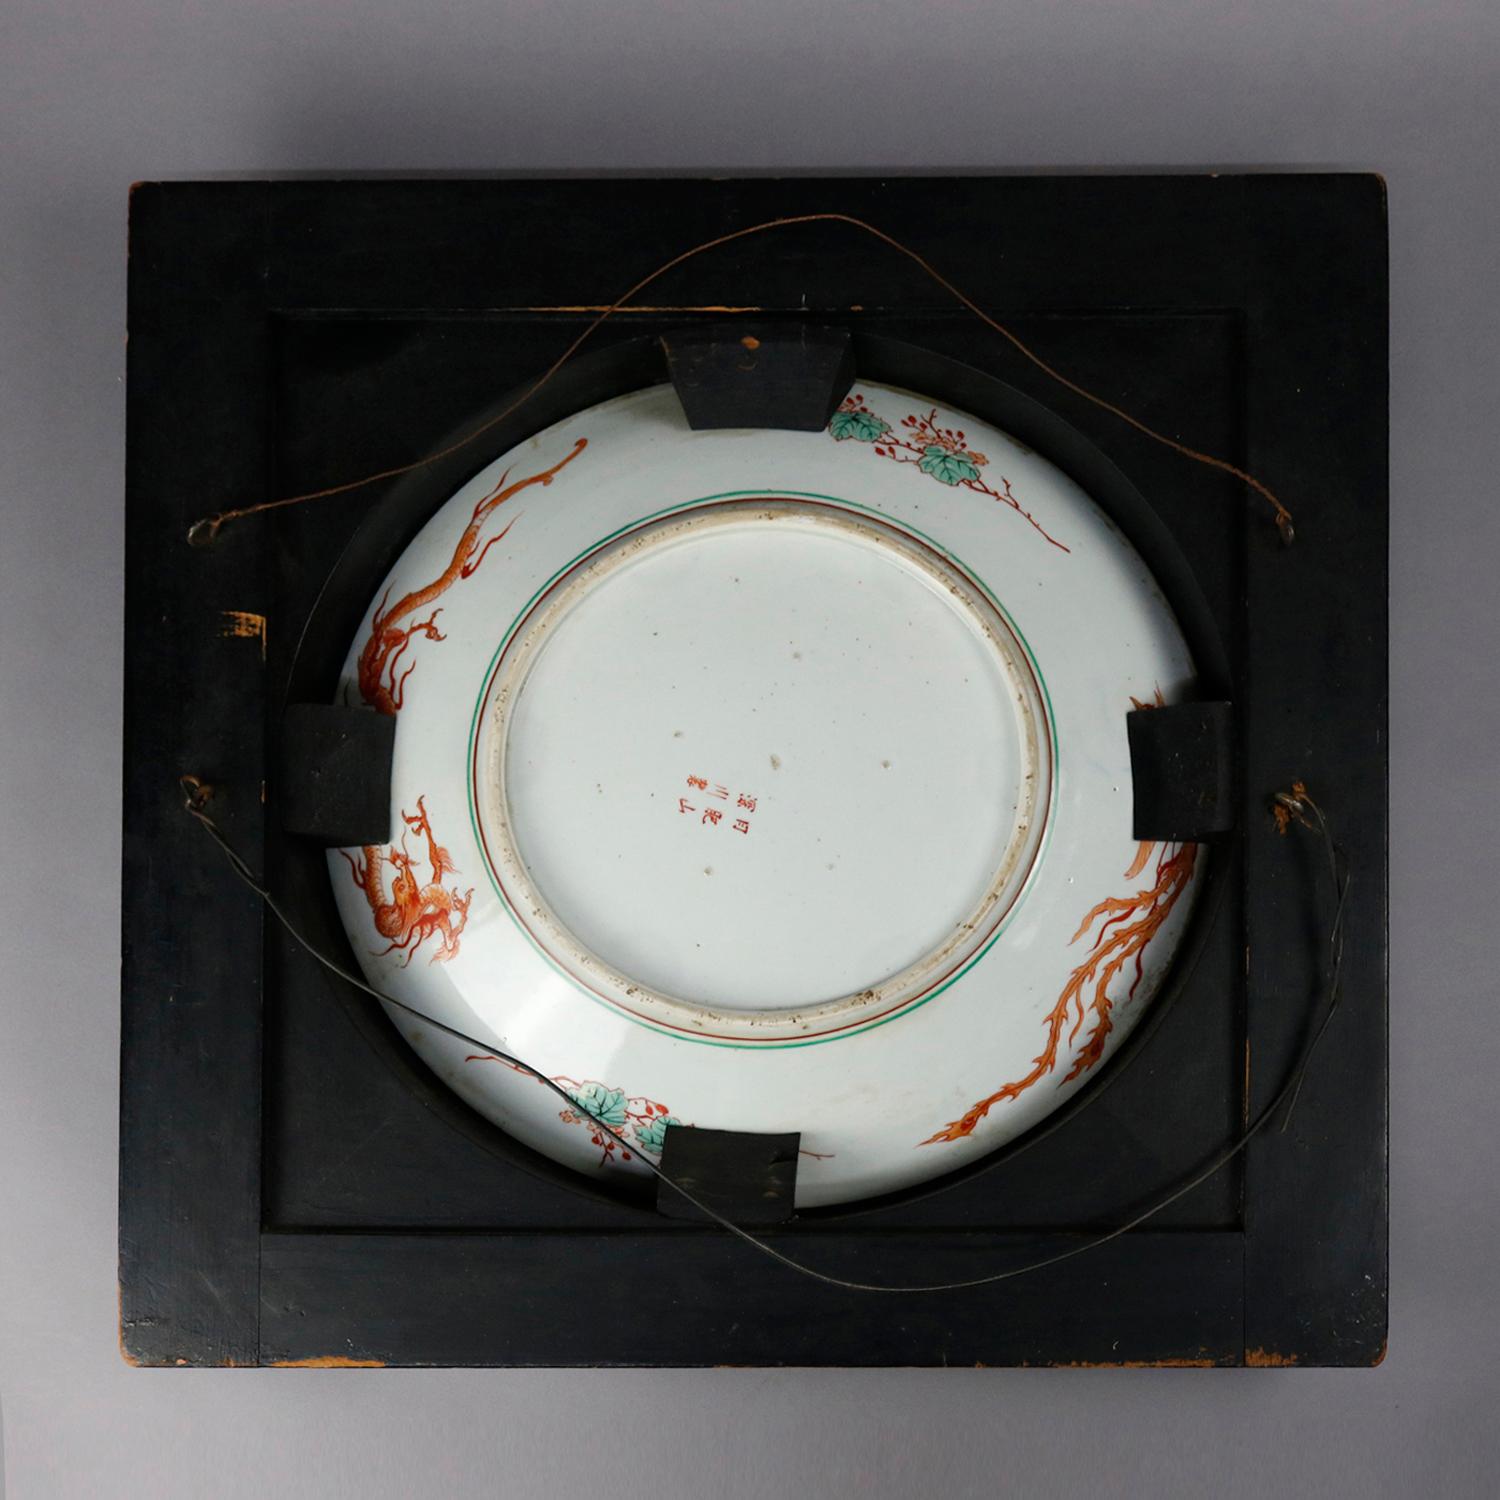 Antique Japanese Imari Porcelain Charger by Hichozan Shimpo Signed, 19th Century 5